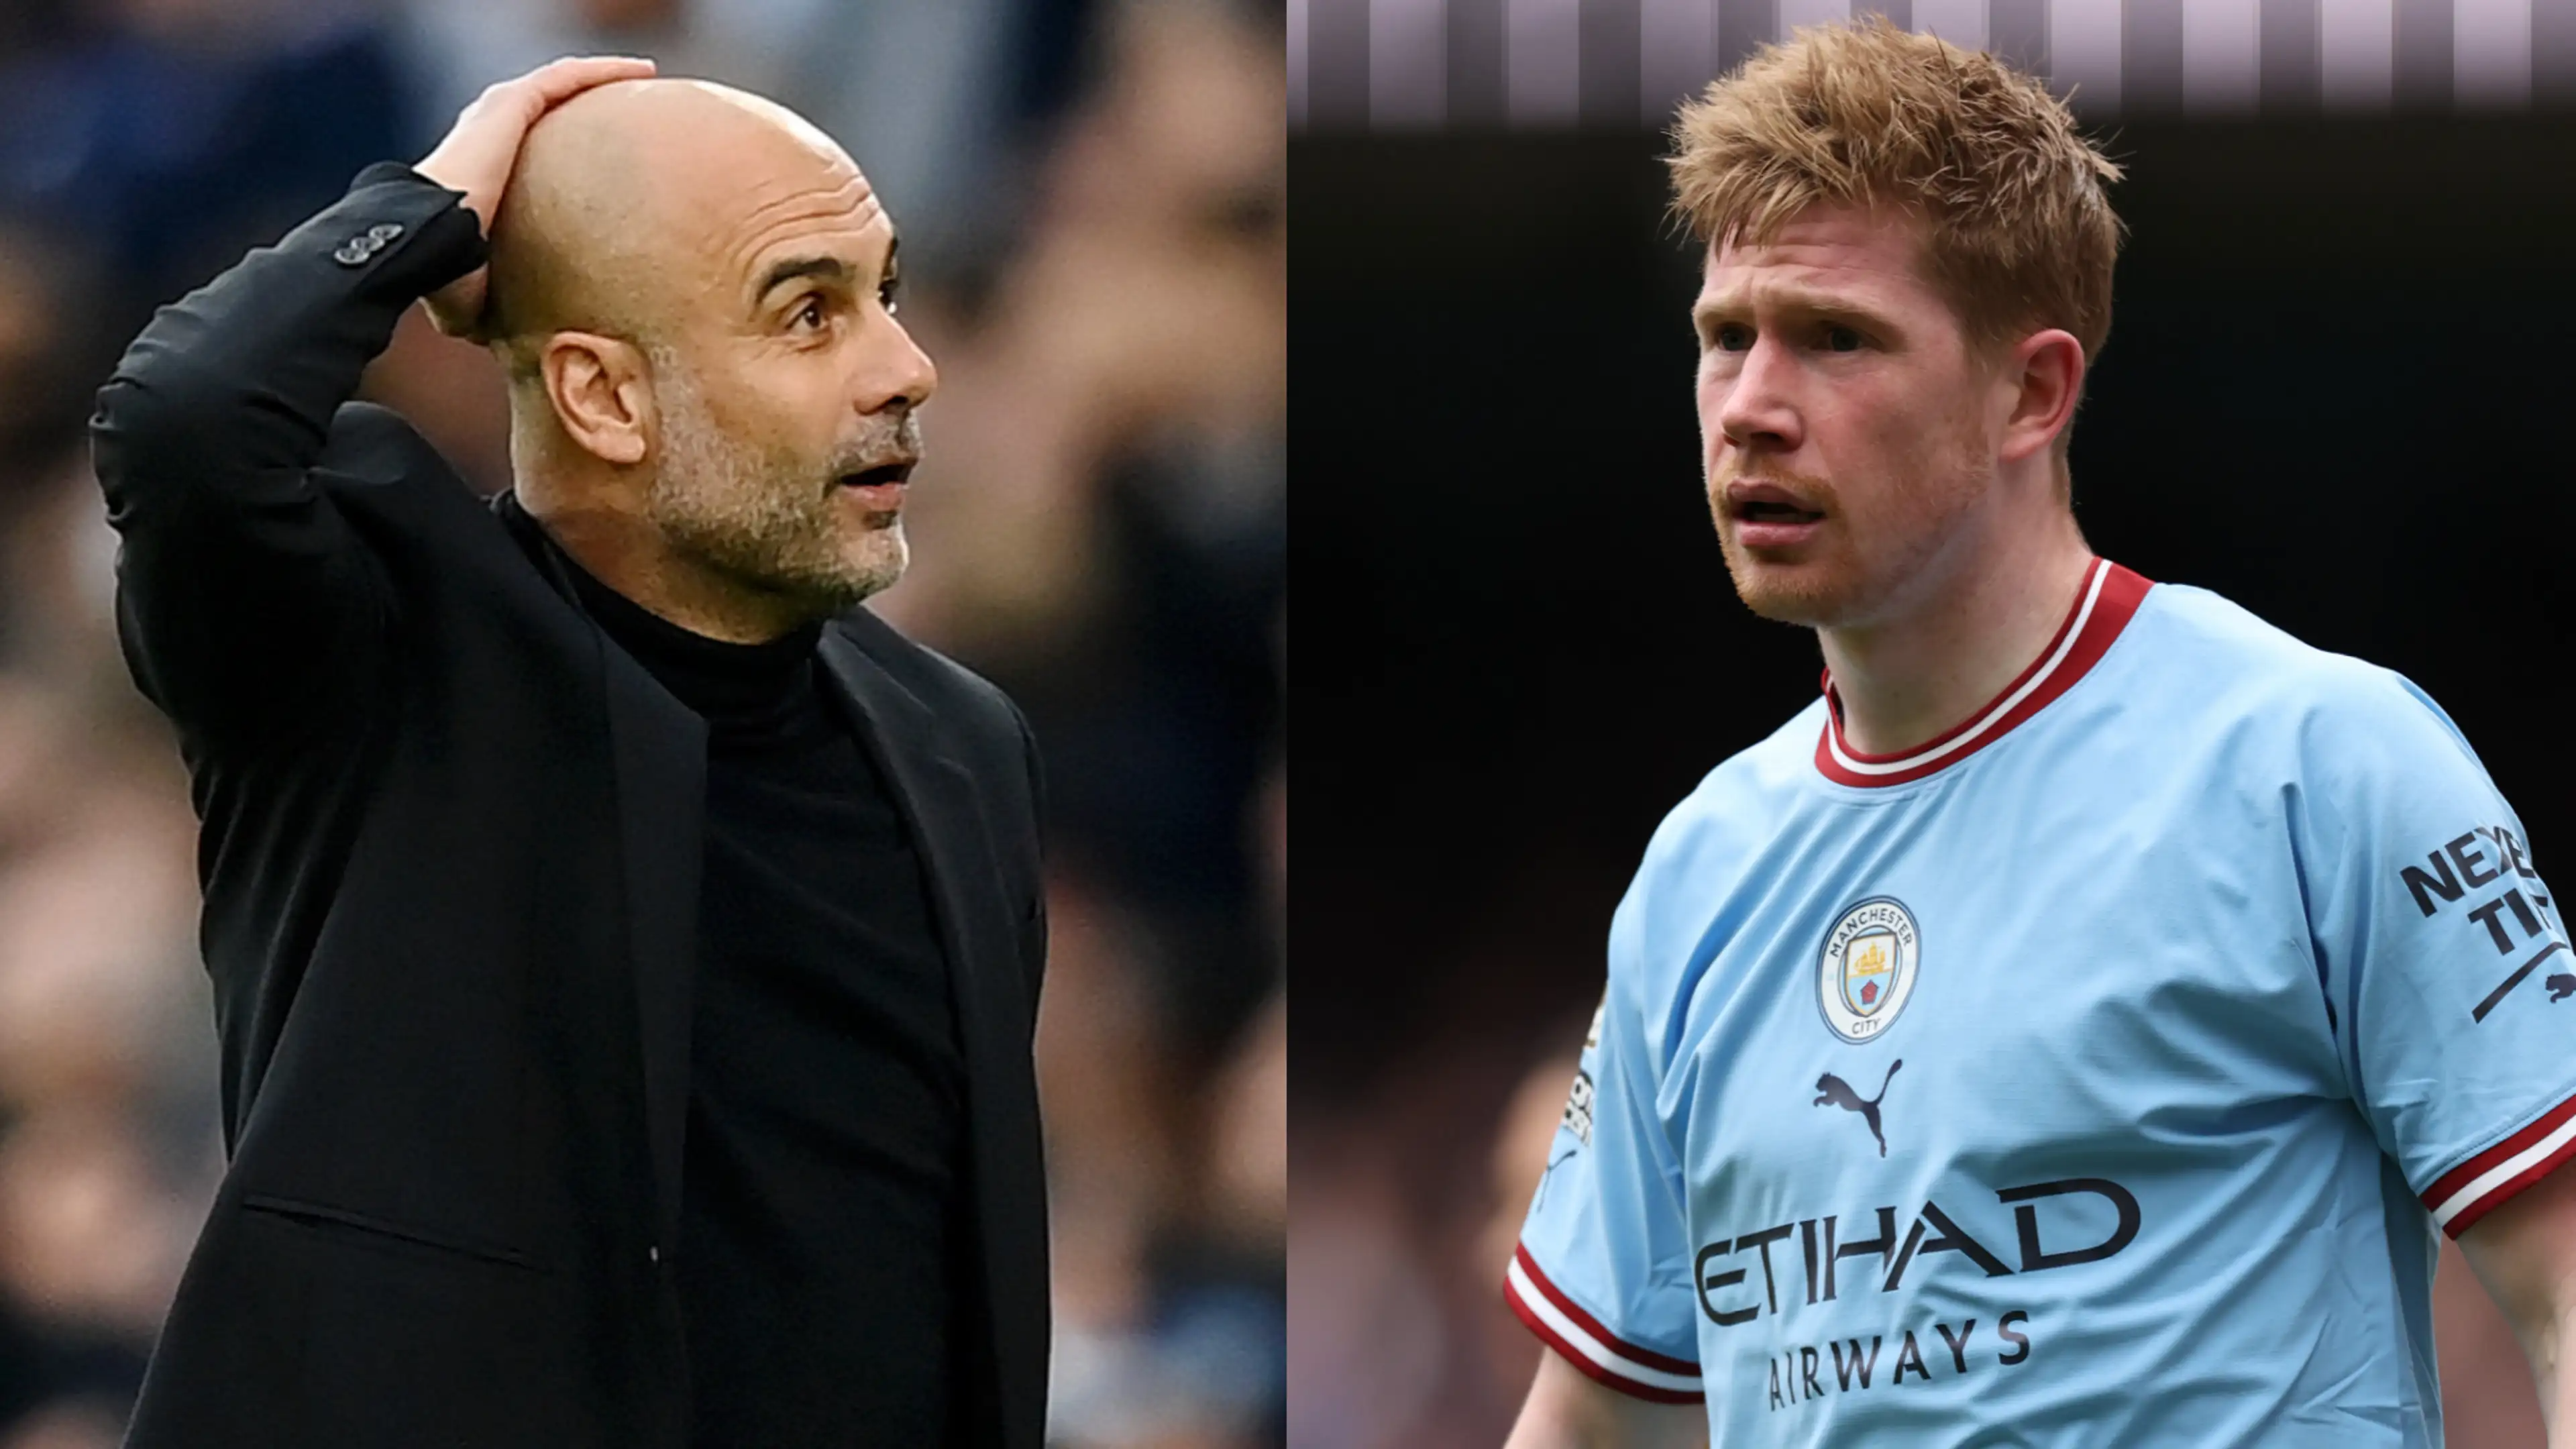 Guardiola Comments on De Bruyne's Rude Remarks in Real Madrid Match